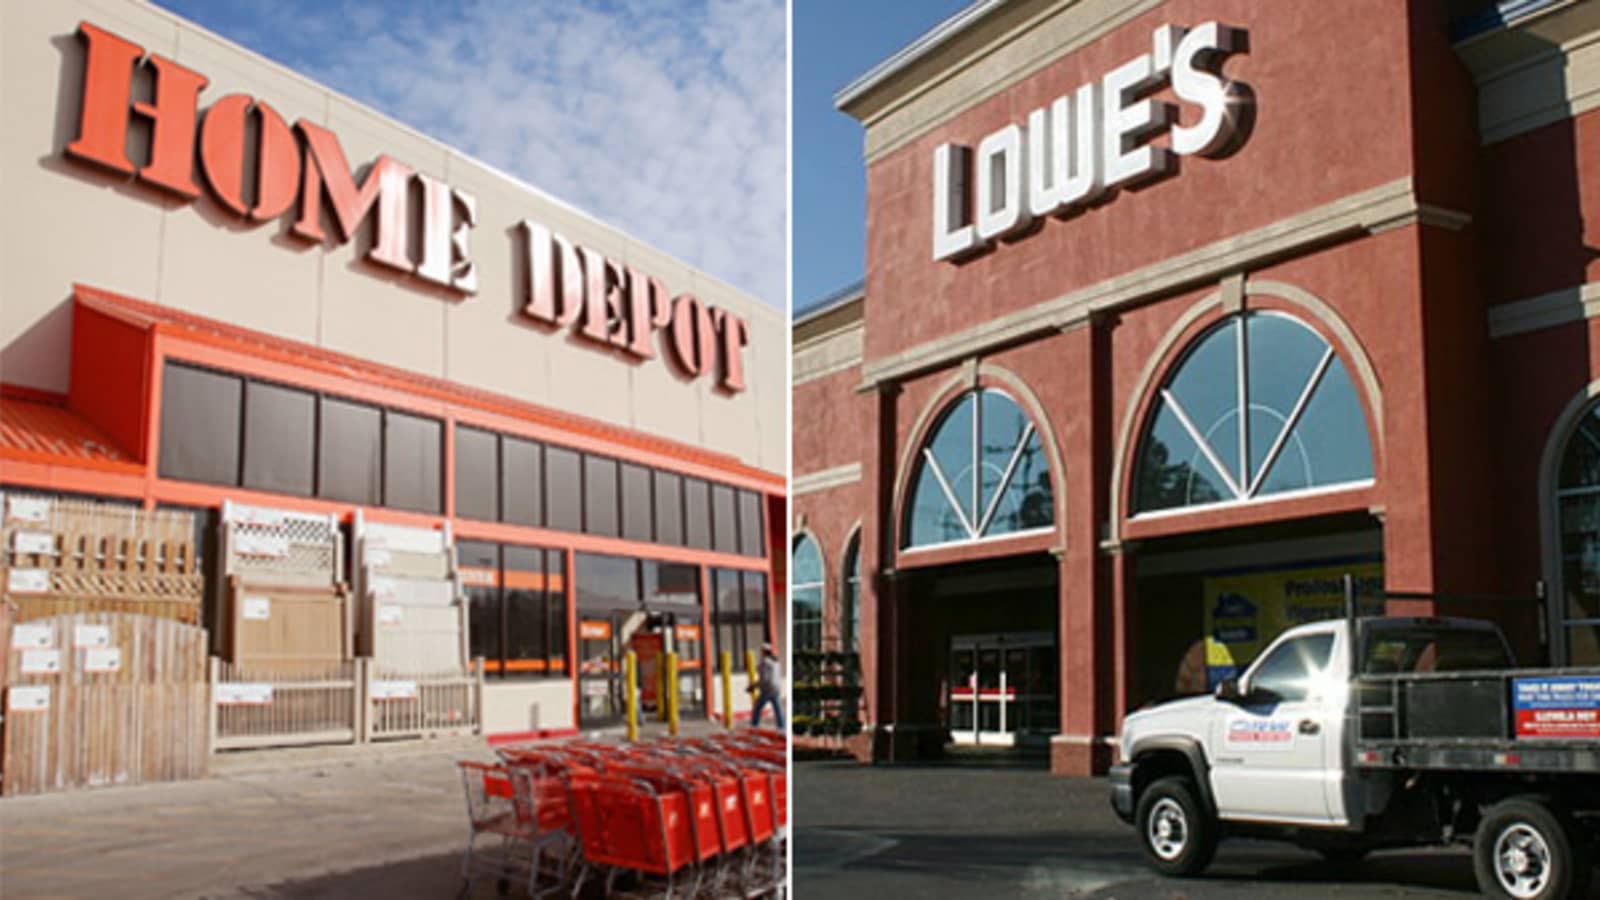 Does Lowe's Price Match Home Depot In 2022? (Full Guide)